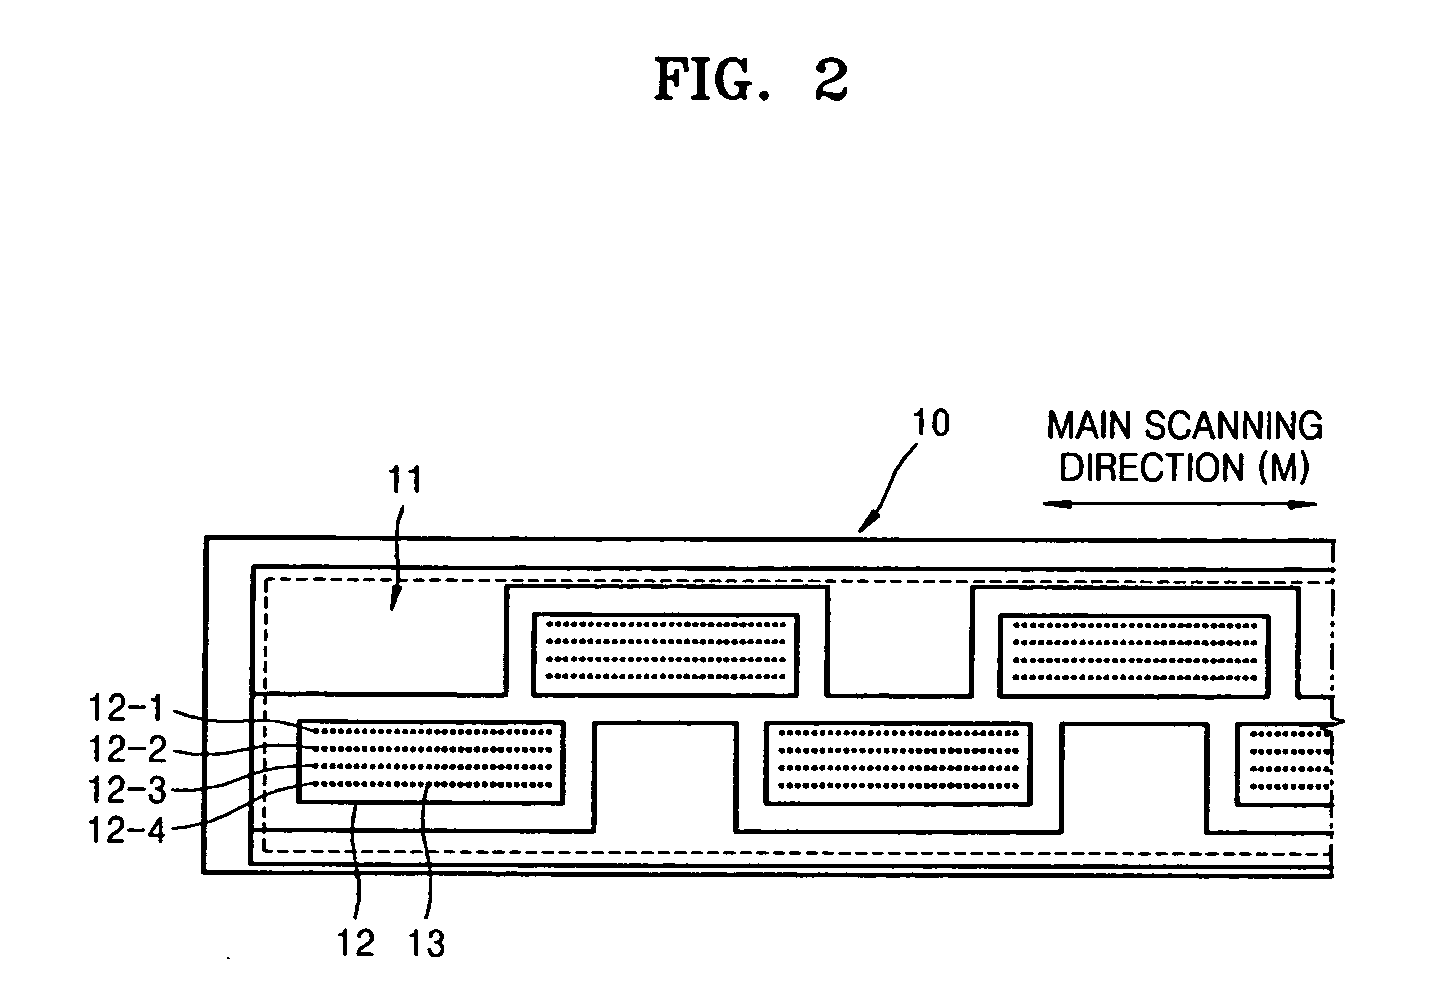 Inkjet image forming apparatus having a capping unit